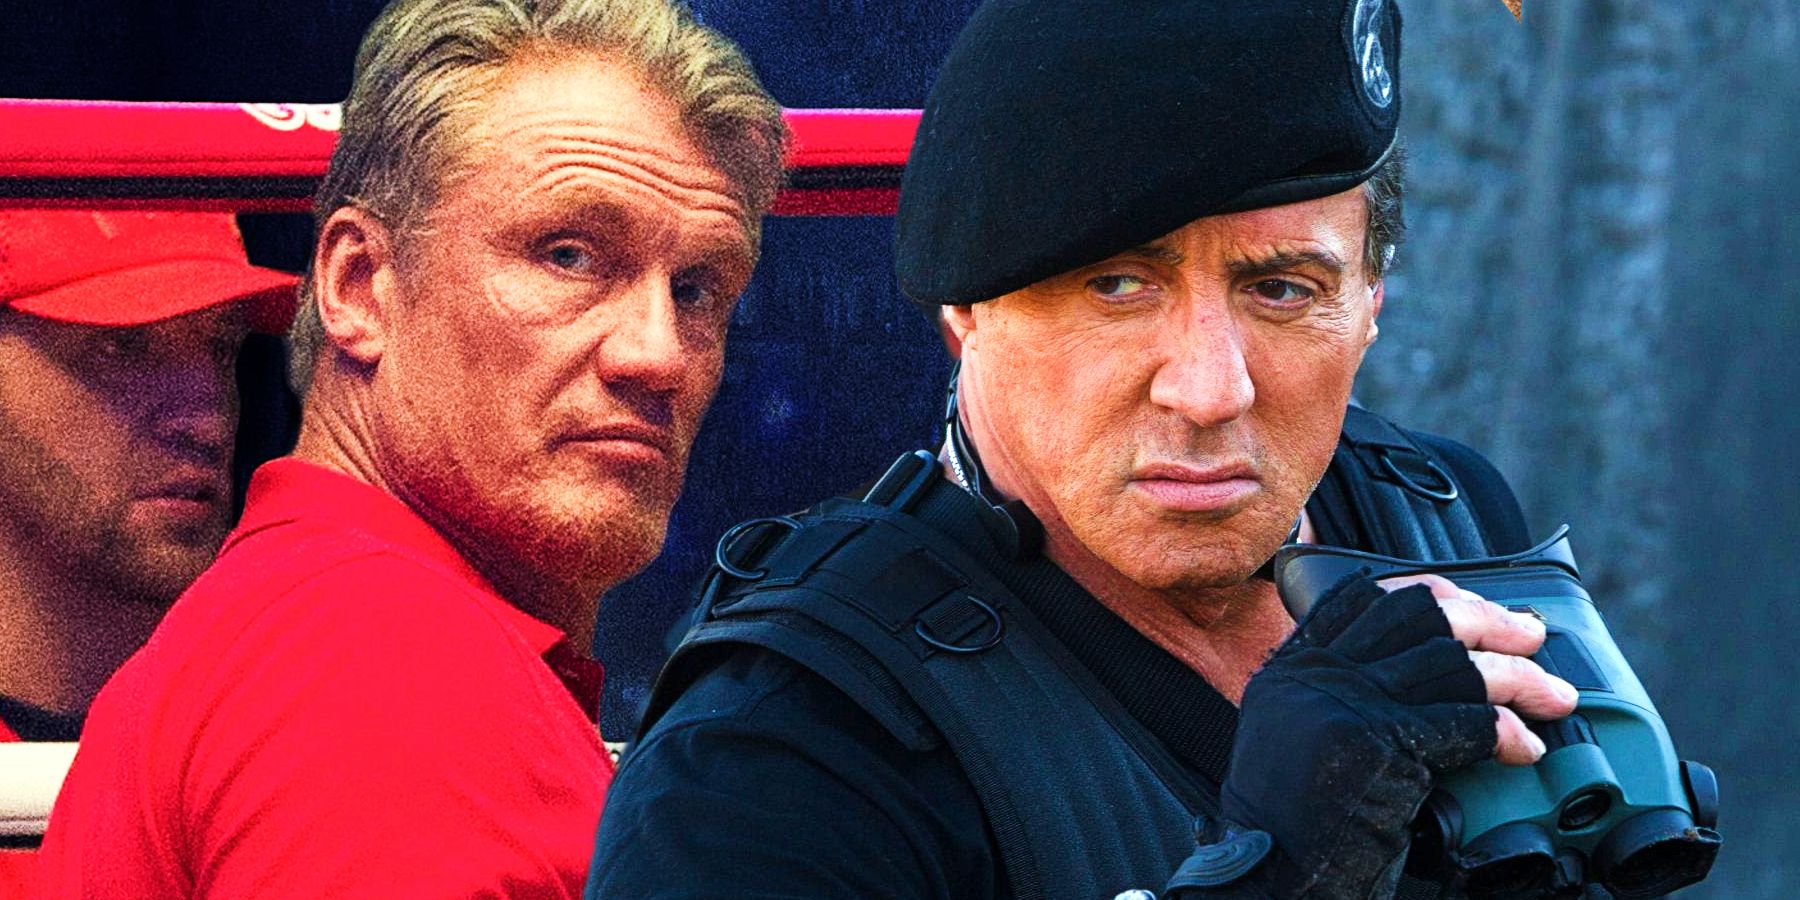 Dolph Lundgren On Wanted Man, Delivering Realistic Action On A Budget, Expendables & Drago’s Future